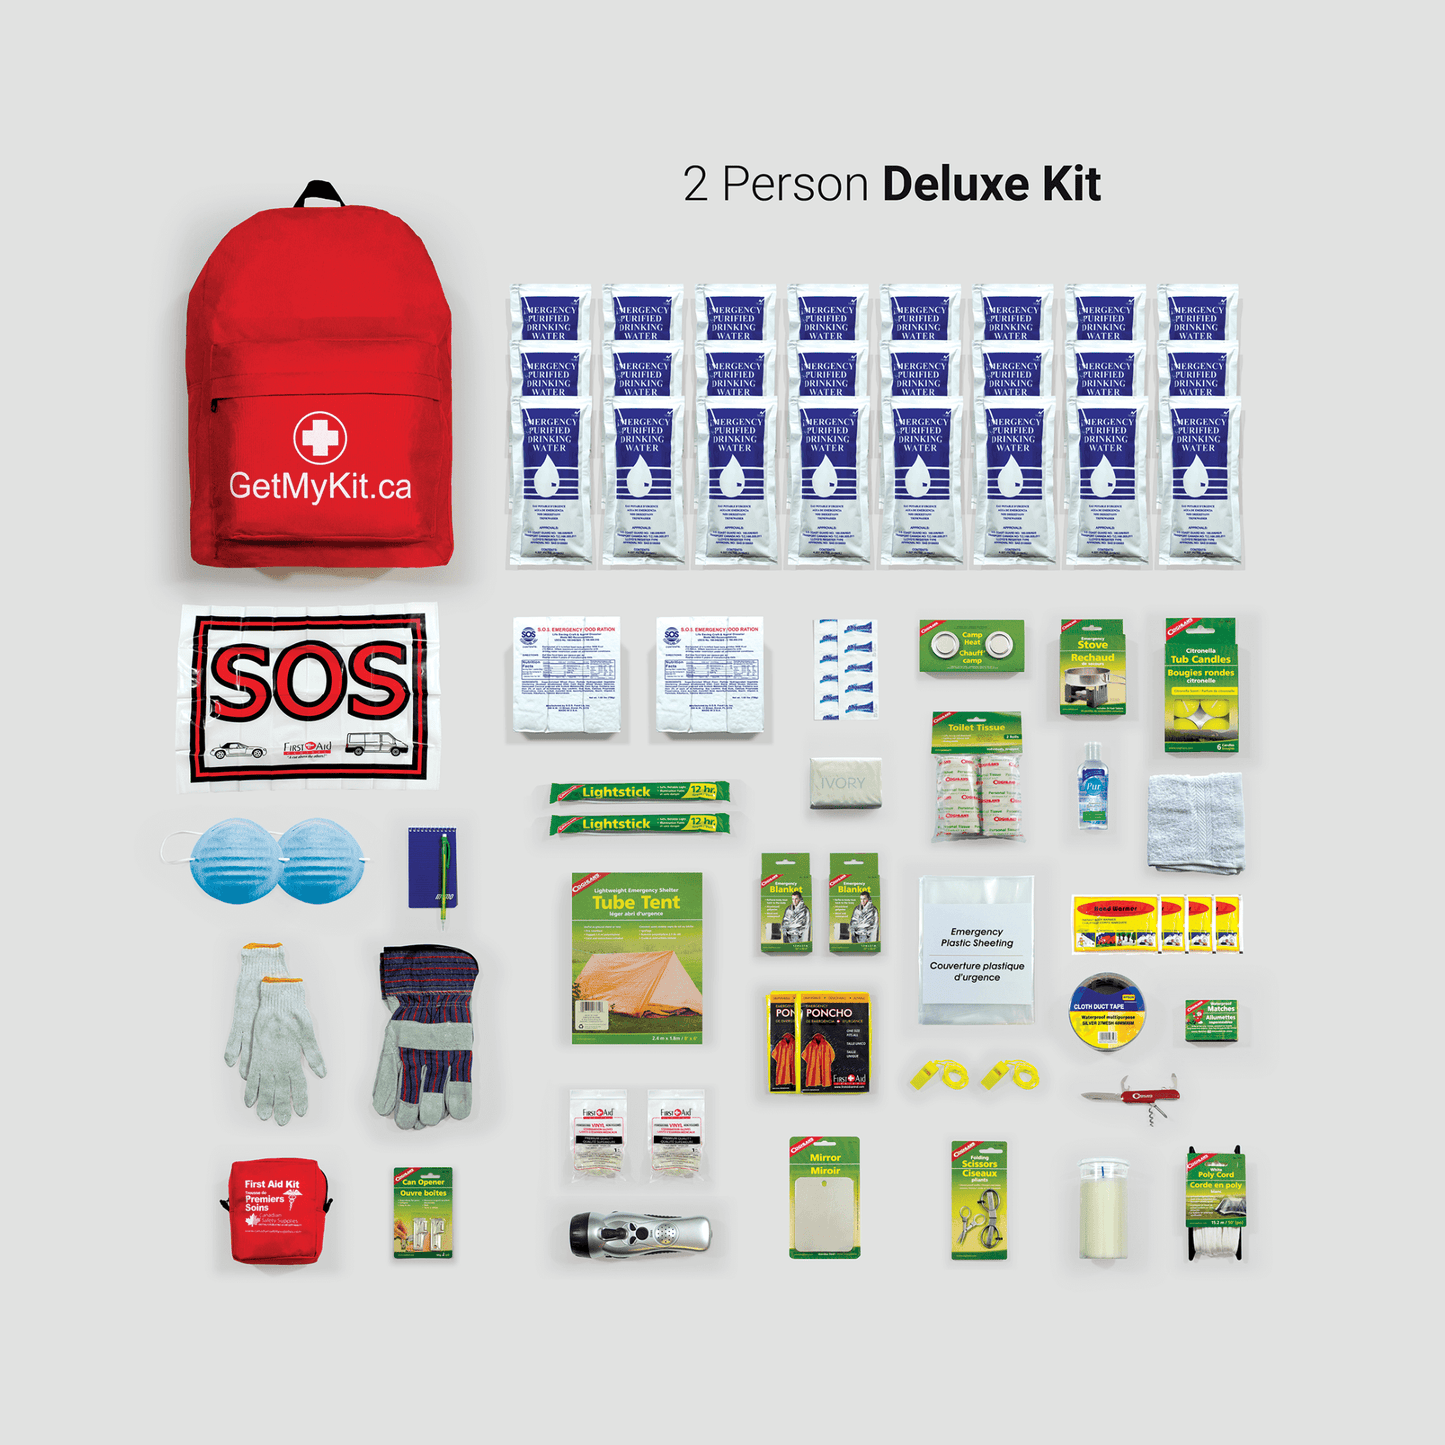 A two person deluxe emergency kit and its contents.